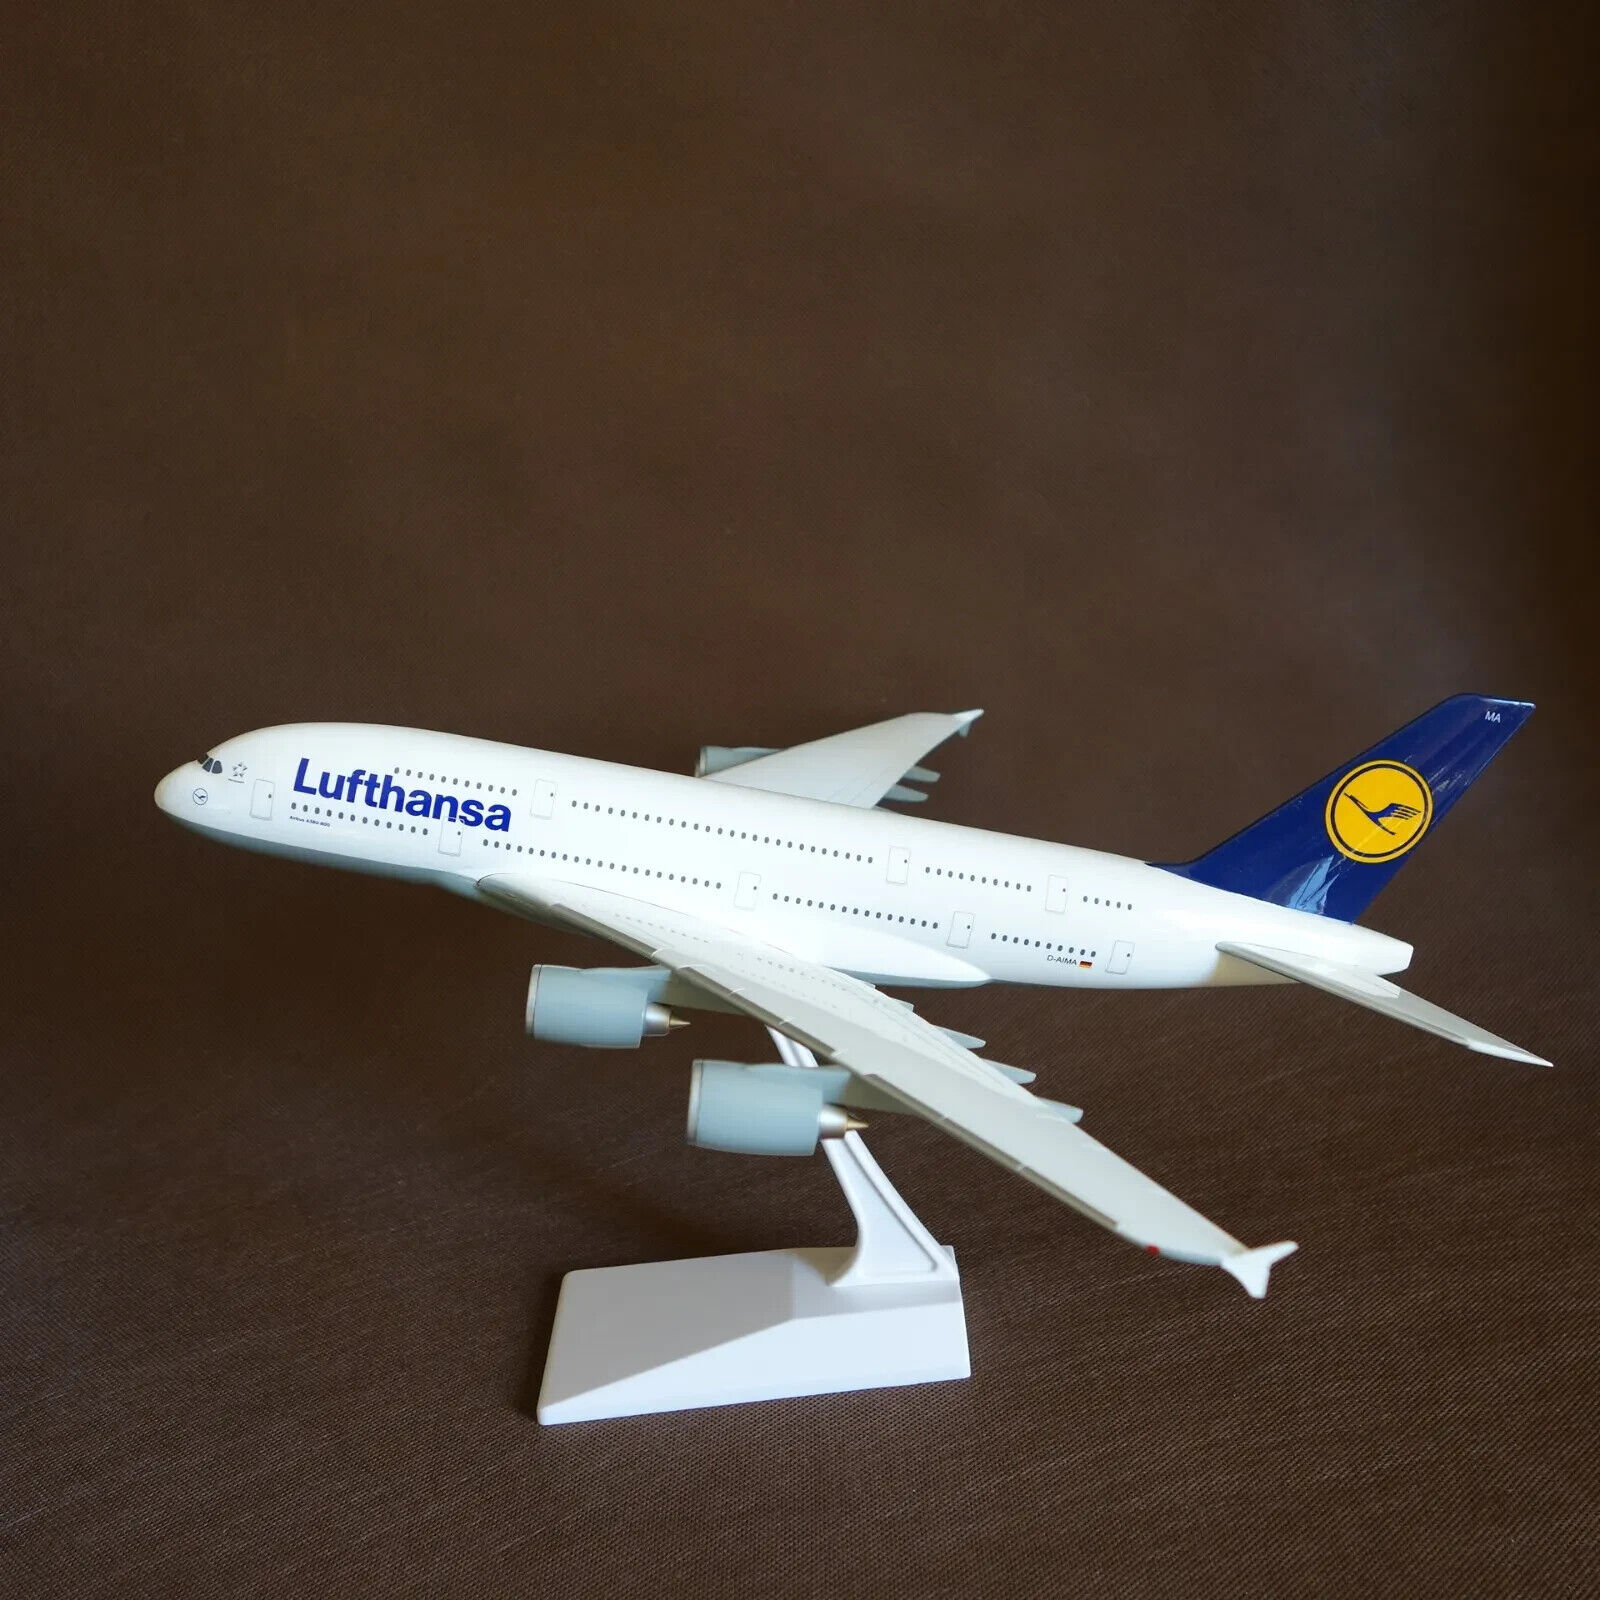 1/200 Lufthansa Airbus A380 airplane model with landing gears